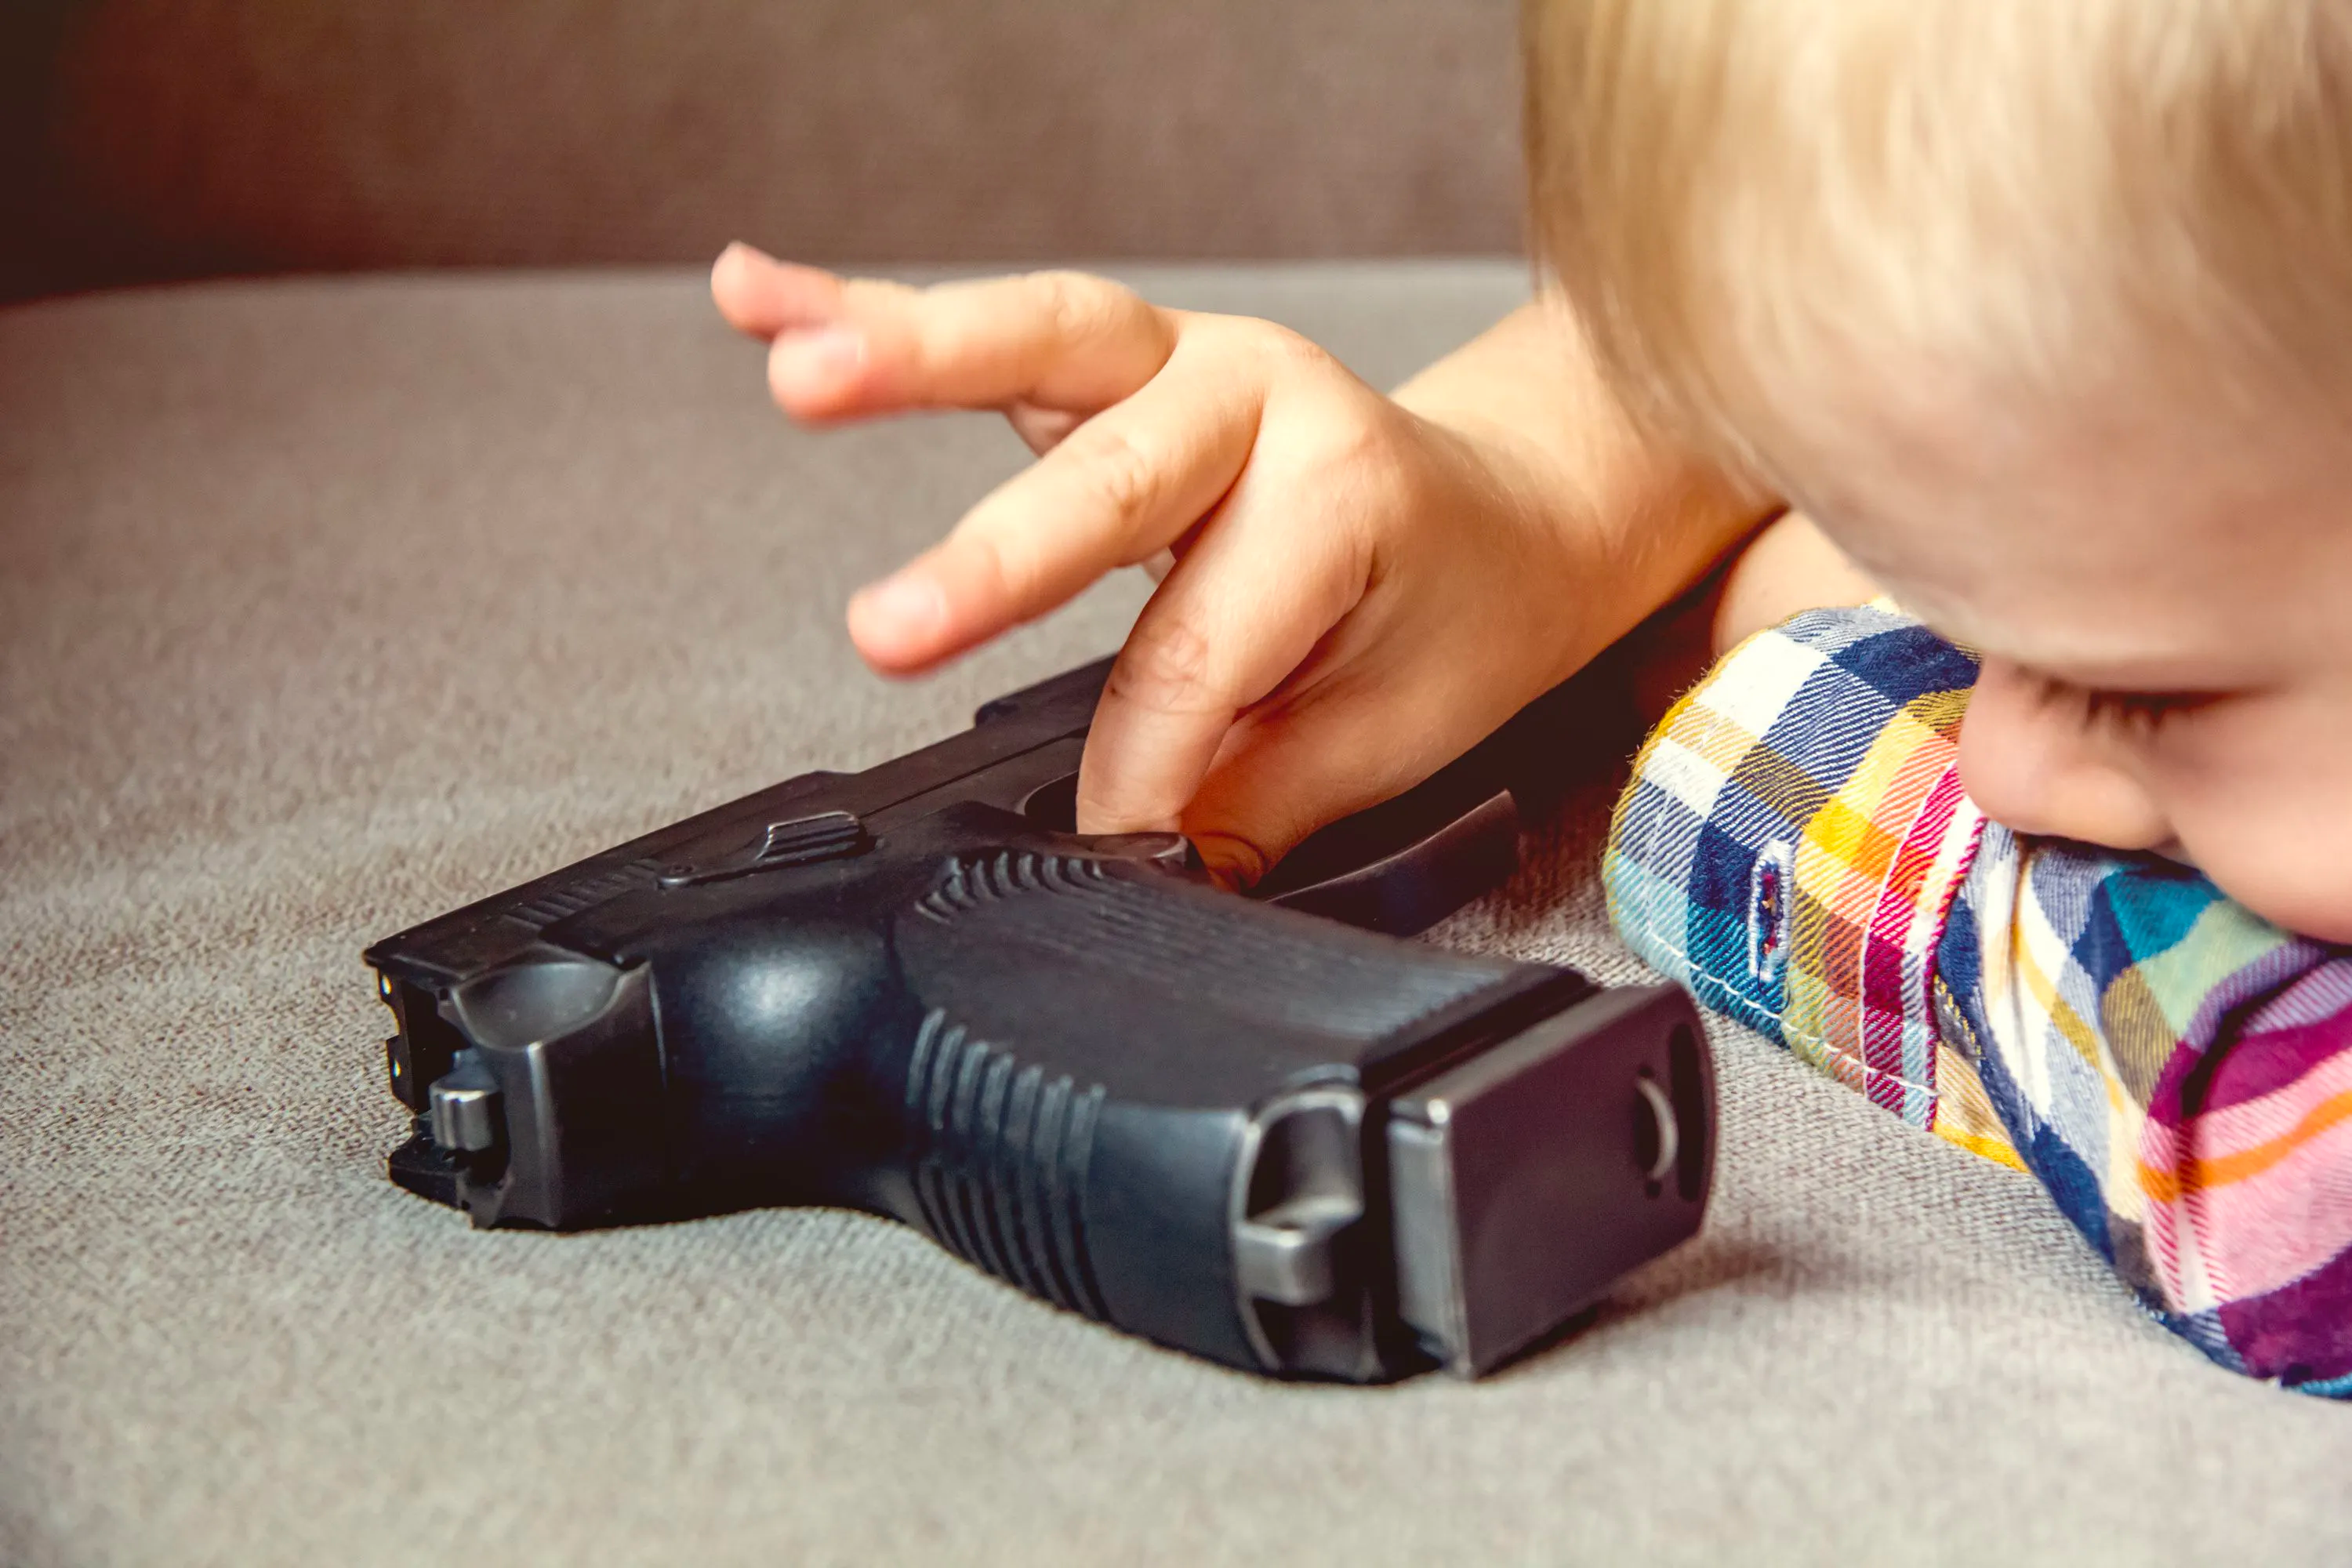 CDC:Unlocked, loaded firearms significantly contribute to accidental firearm deaths in children | Image Credit: © Александра Замулина - © Александра Замулина - stock.adobe.com.